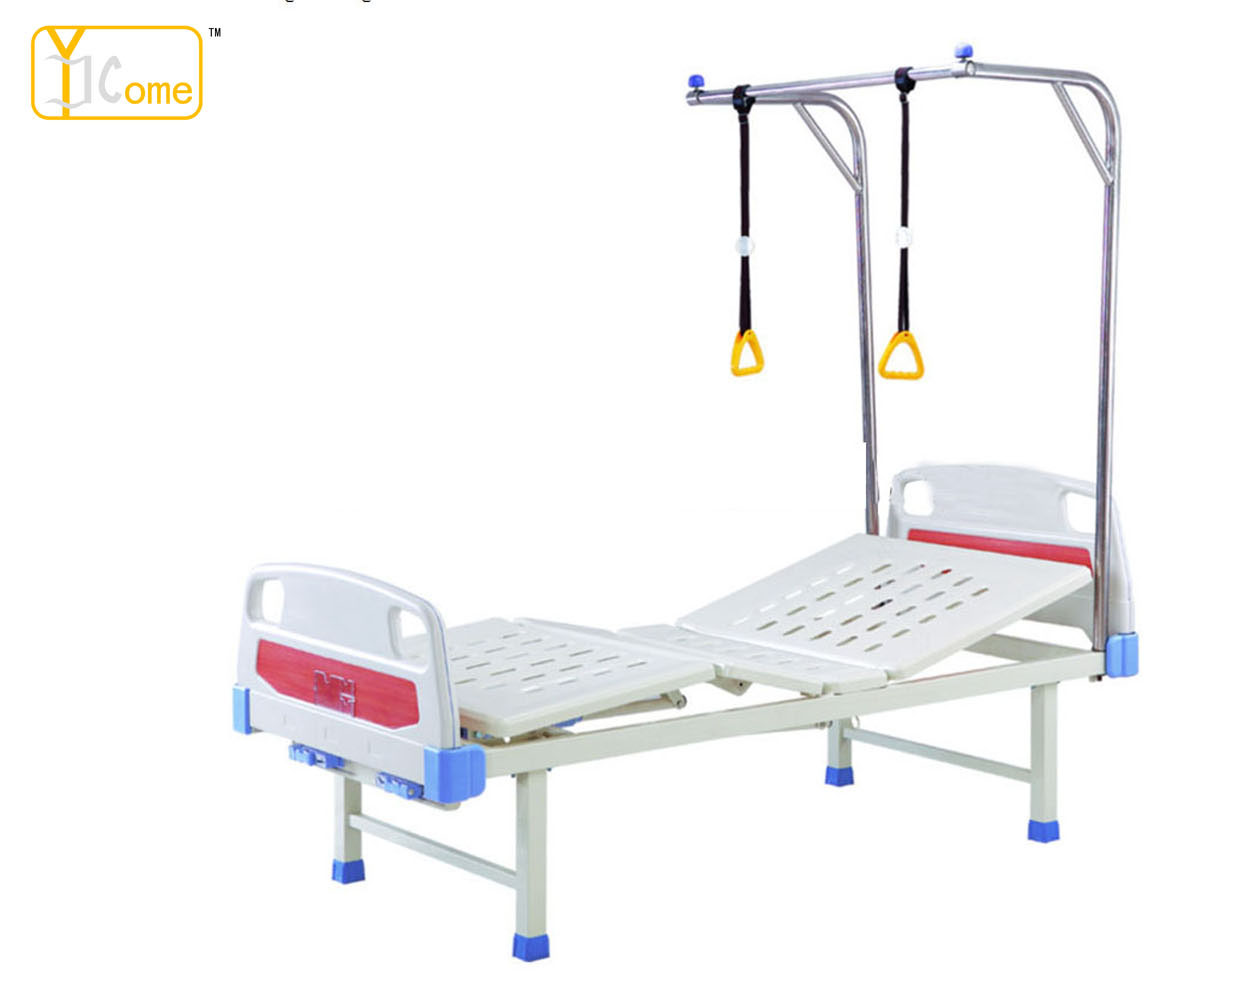  Orthopaedic Traction Bed